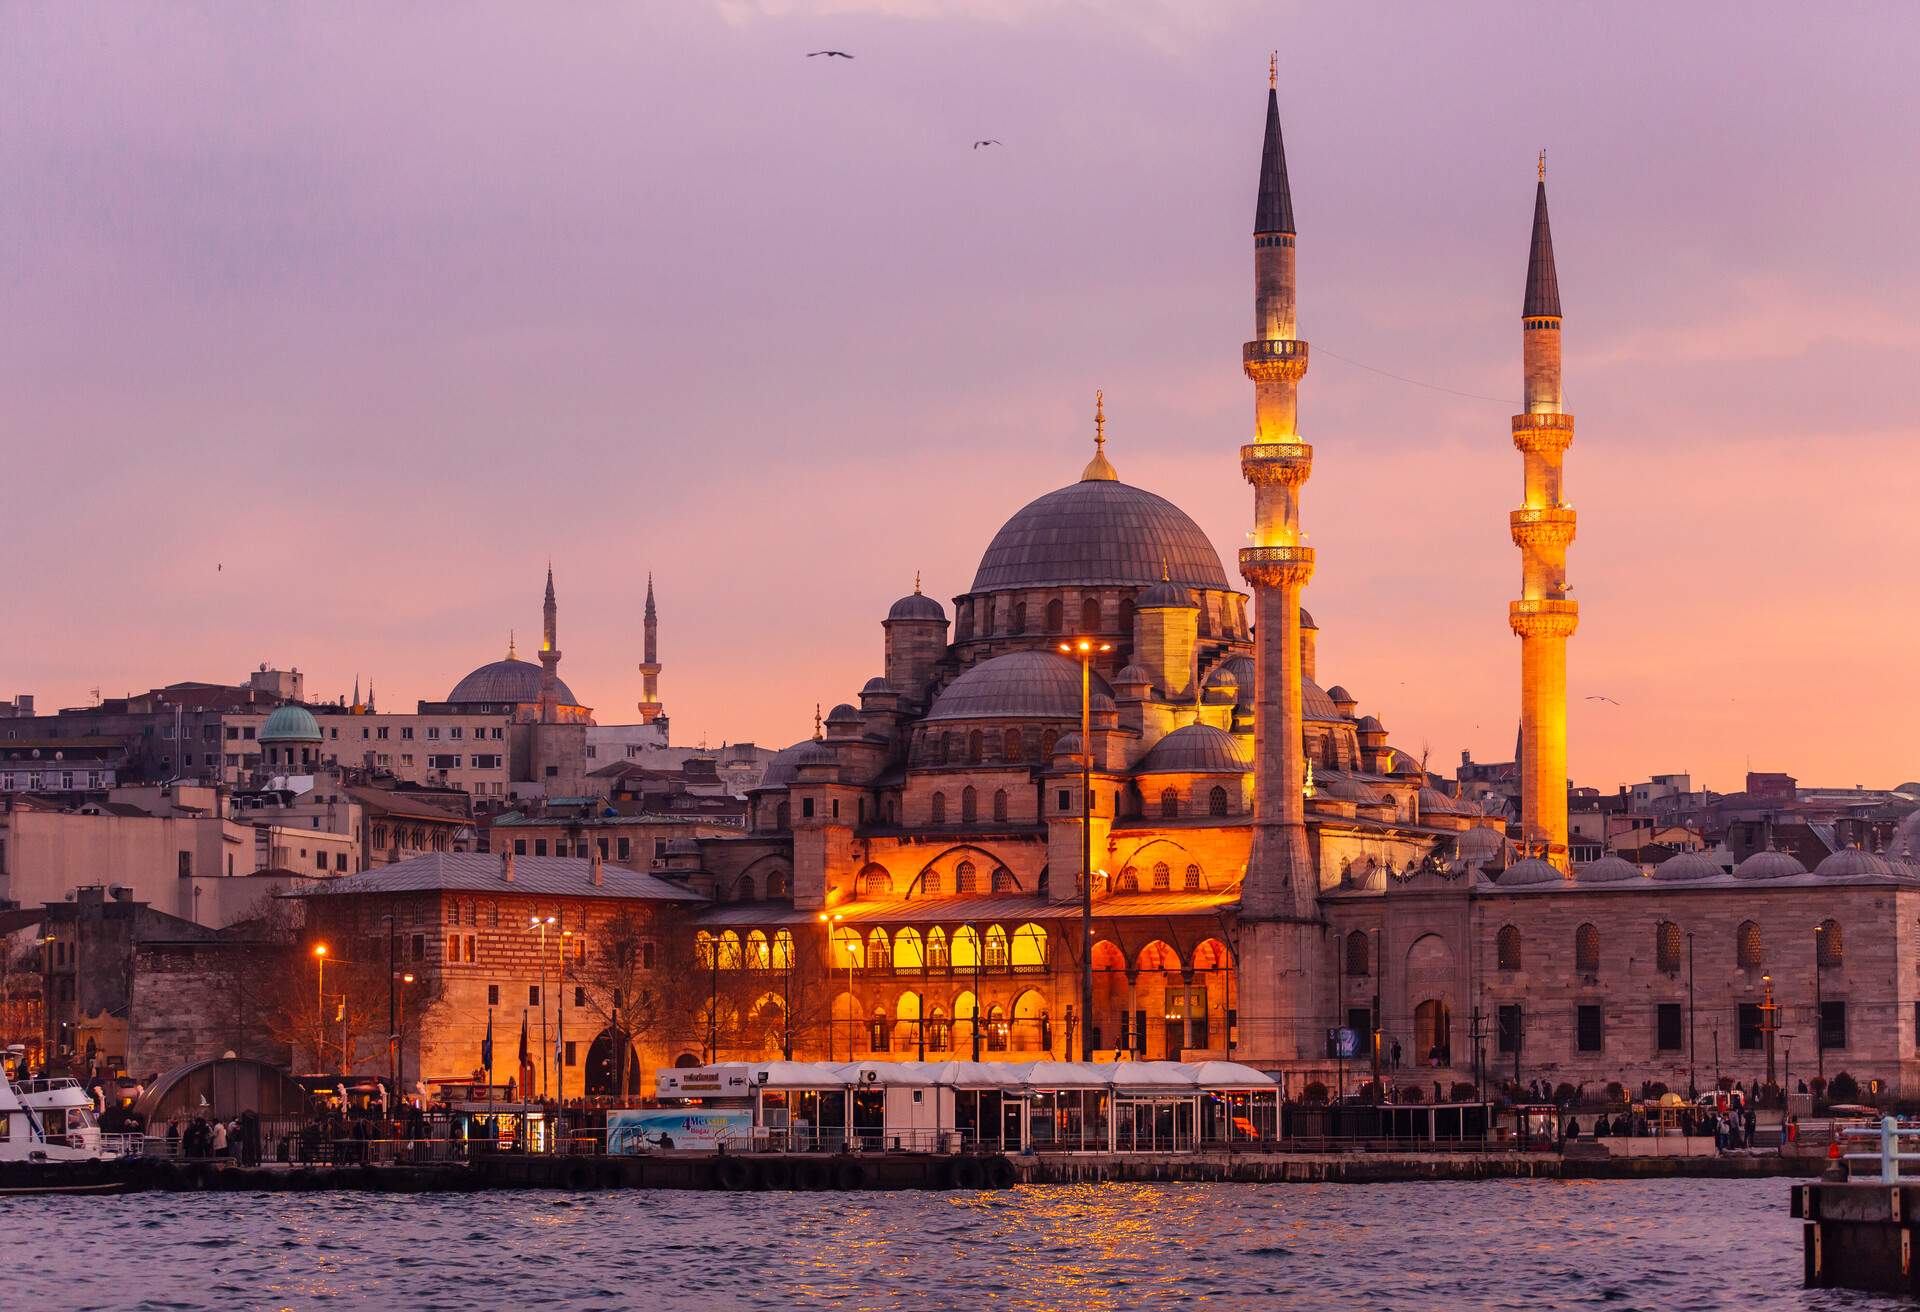 The luminous Yeni Cami and its towering minarets against a purple sky at dusk.